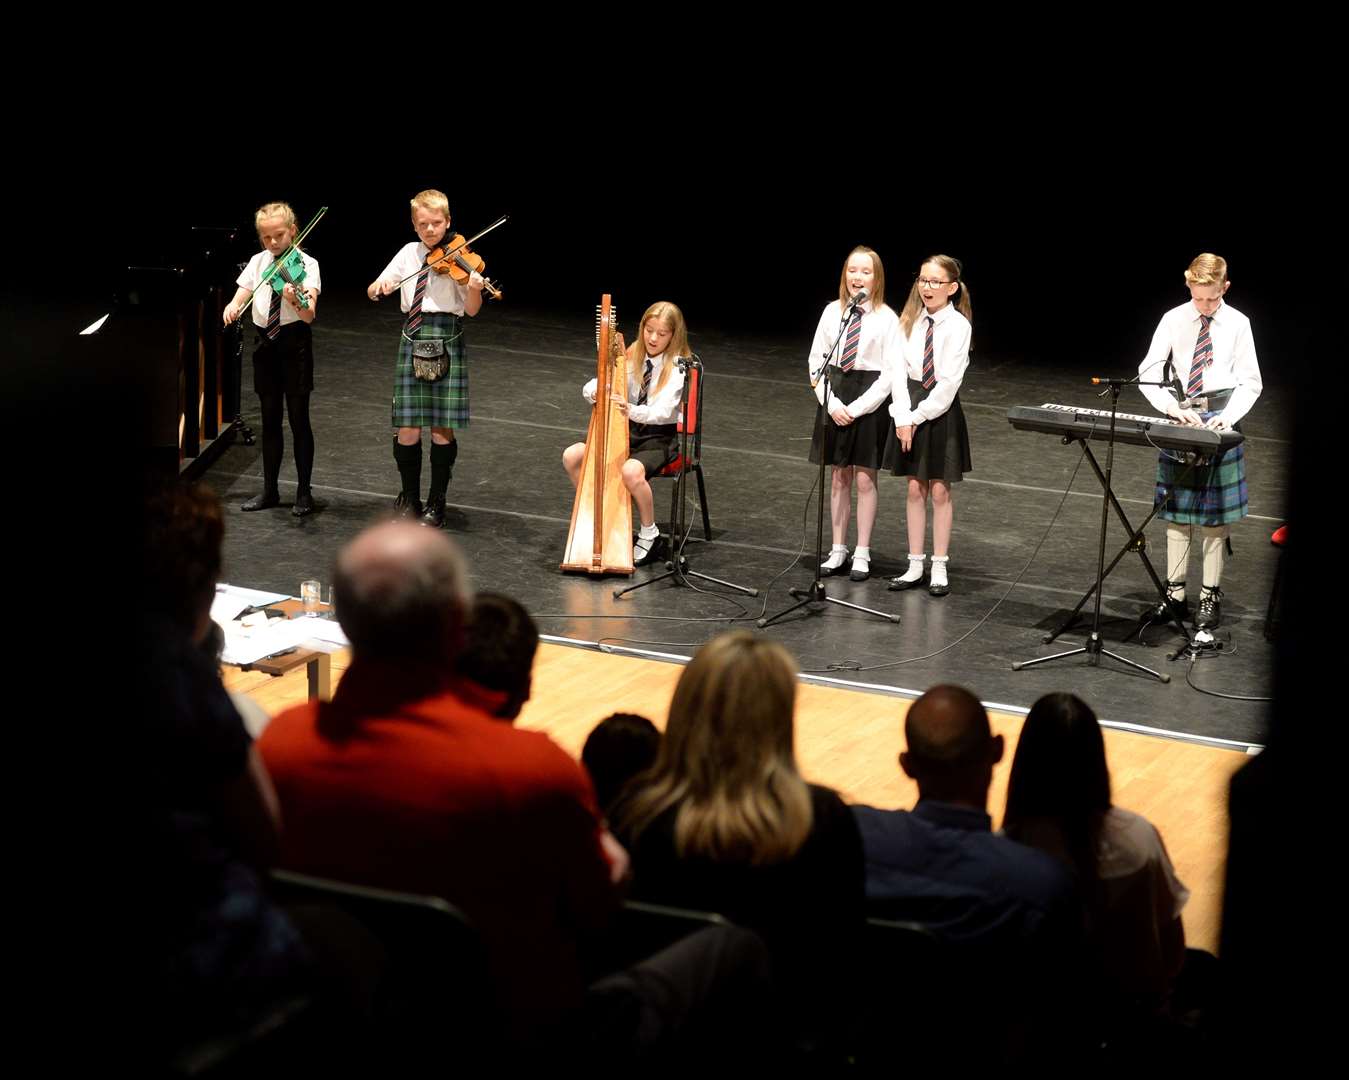 A performance during a previous Inverness Provincial Mod.